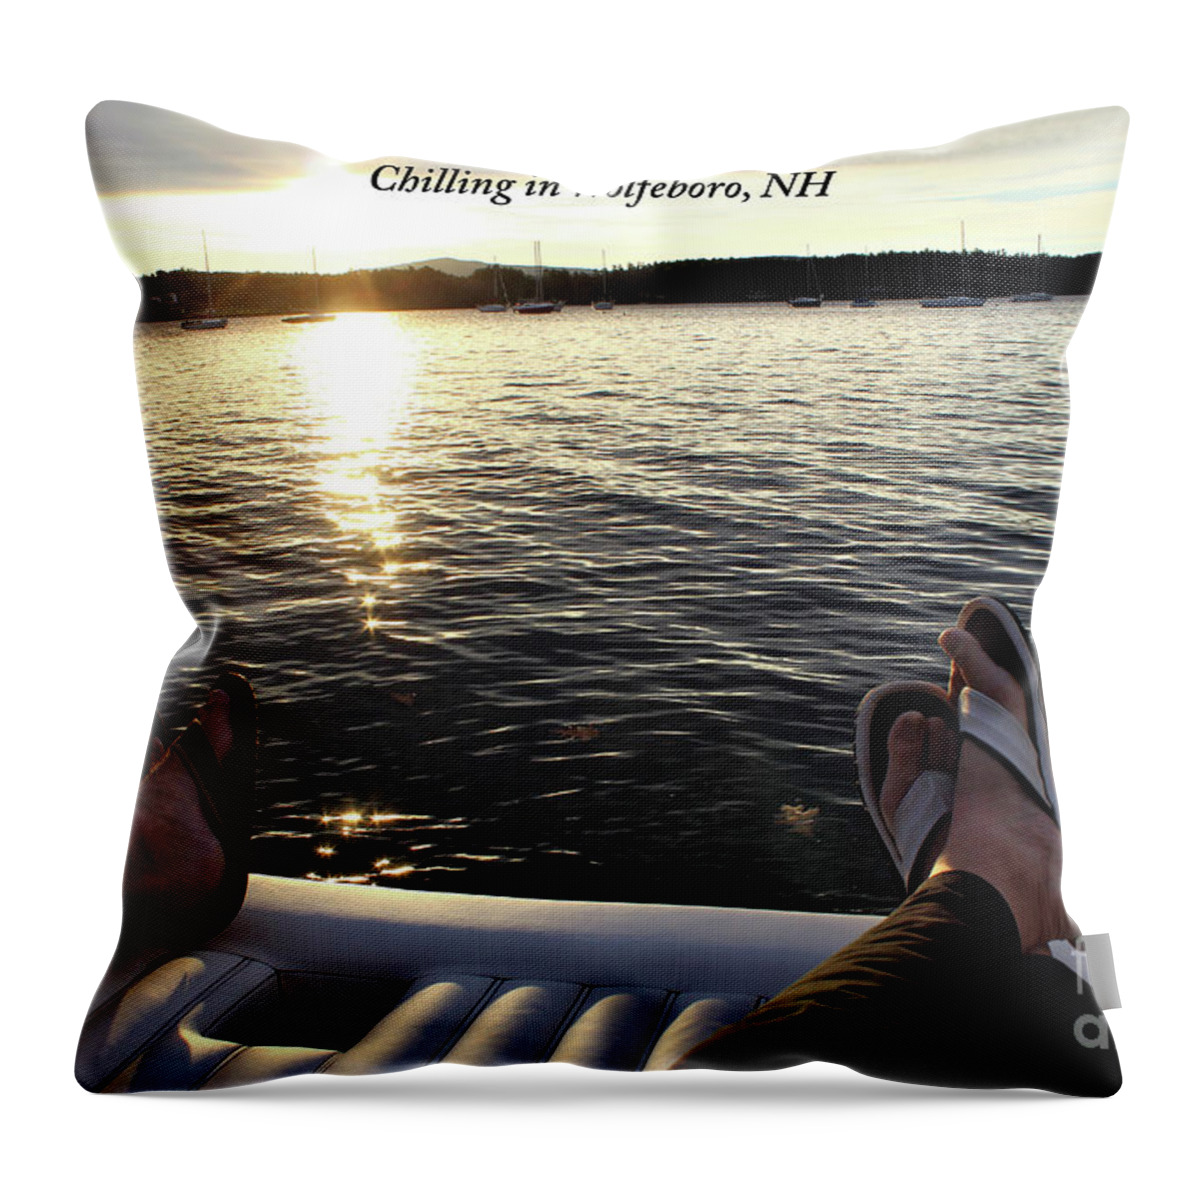  Throw Pillow featuring the photograph Wb004 by Donn Ingemie